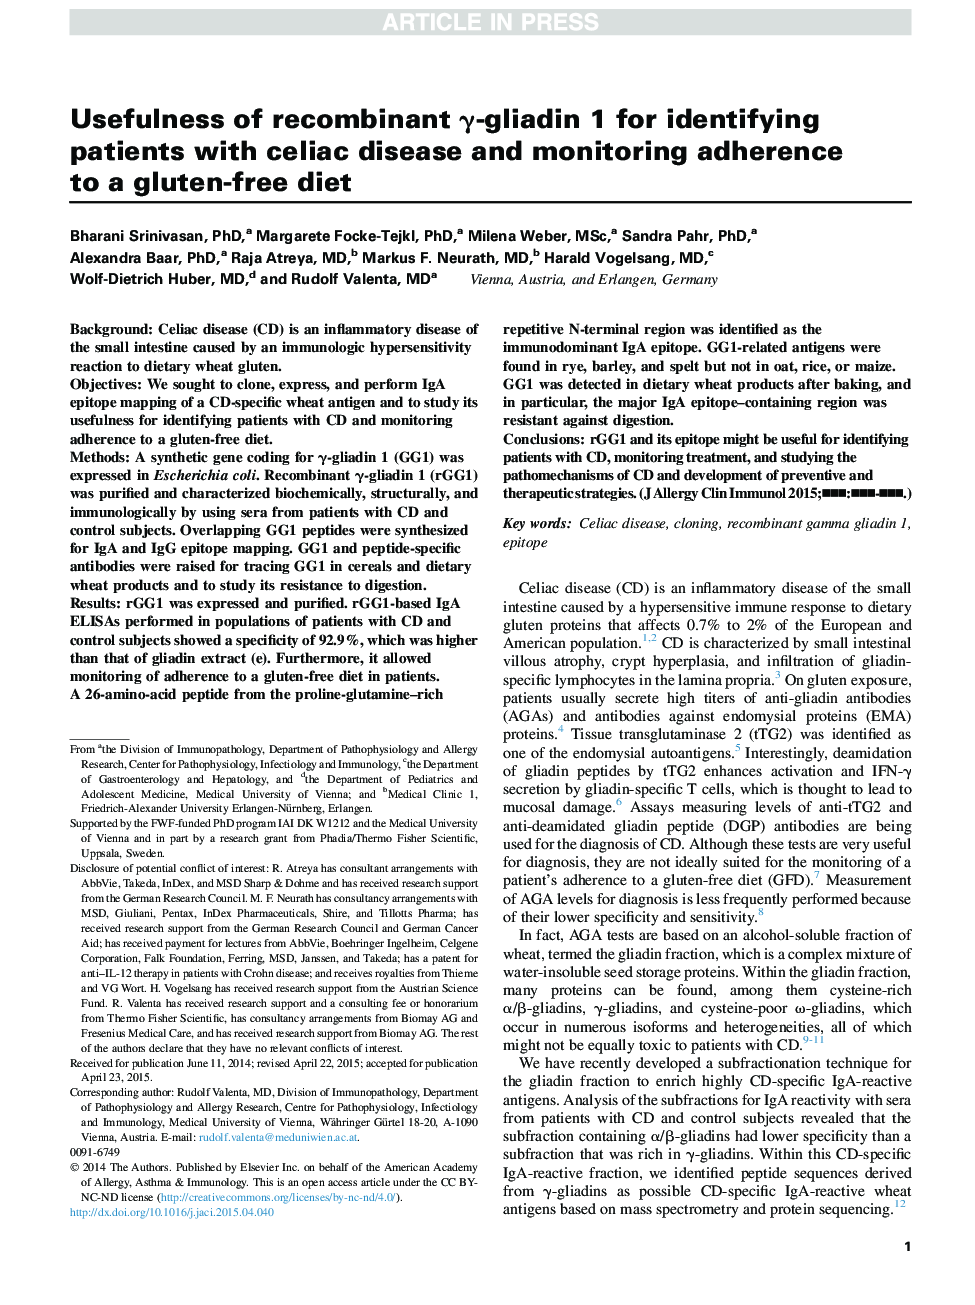 Usefulness of recombinant Î³-gliadin 1 for identifying patients with celiac disease and monitoring adherence to a gluten-free diet